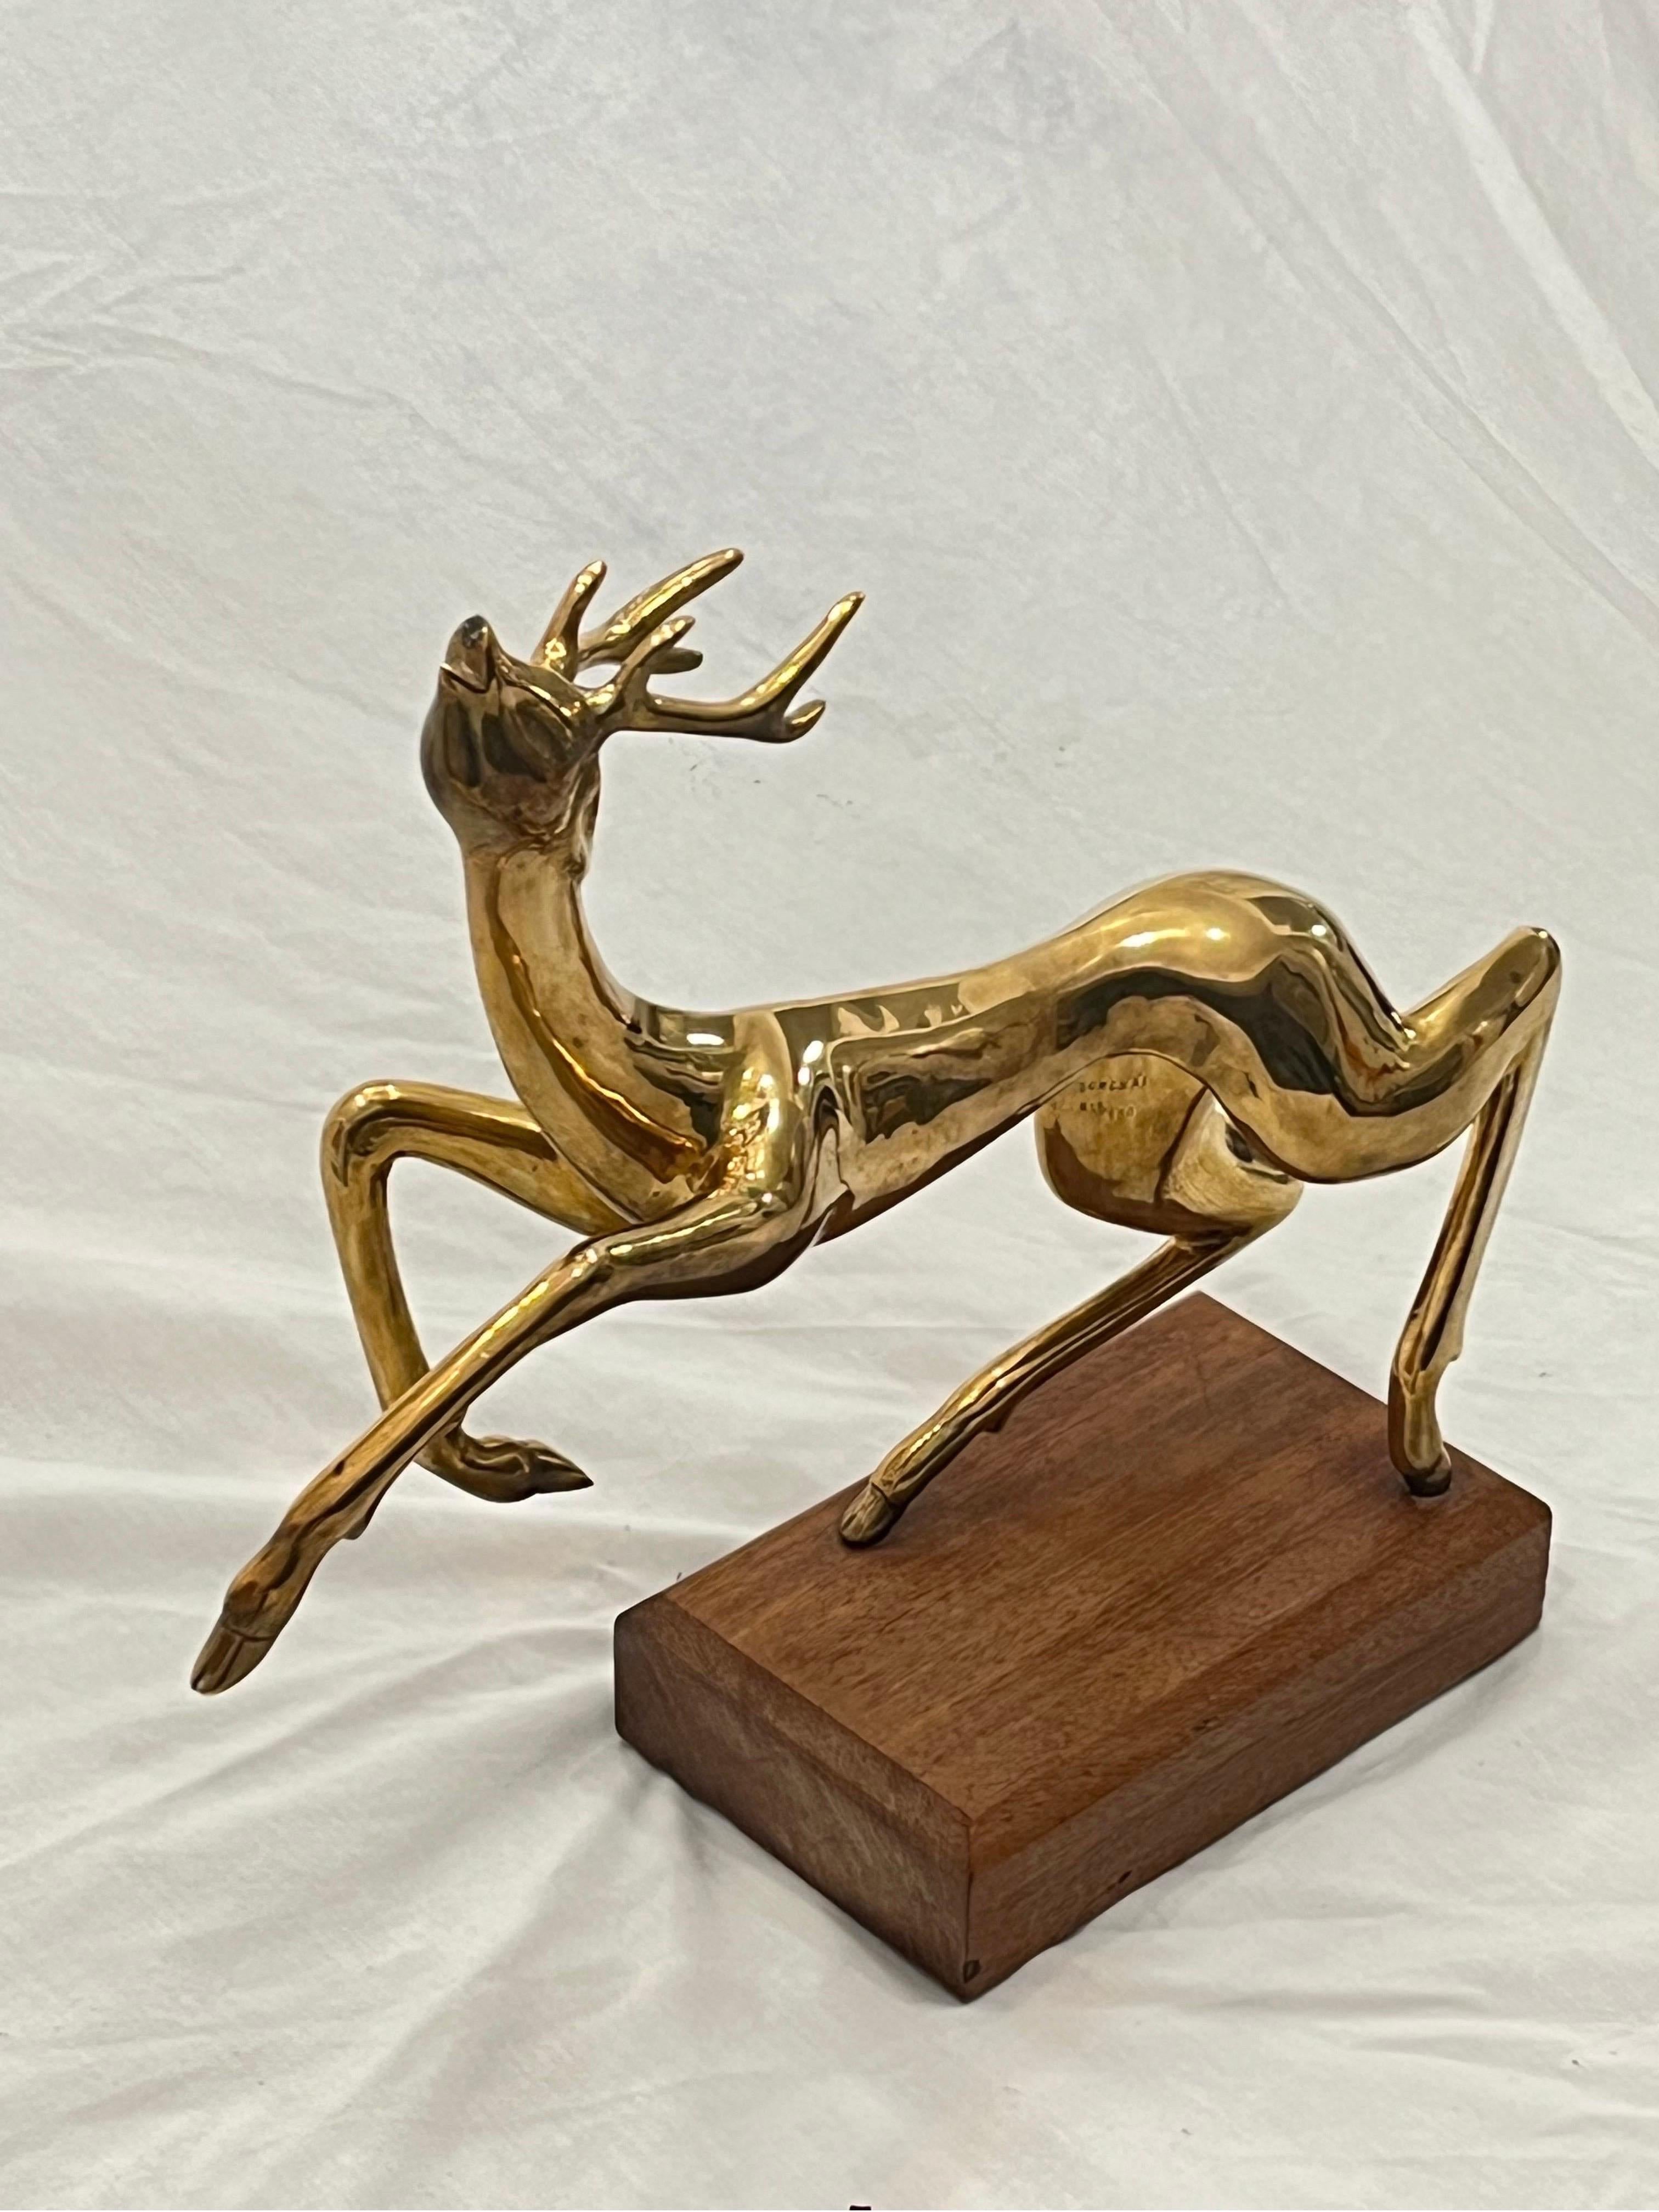 Vintage Thai Somchai Hattakitkosol Signed Solid Bronze Sculpture of Leaping Deer For Sale 2